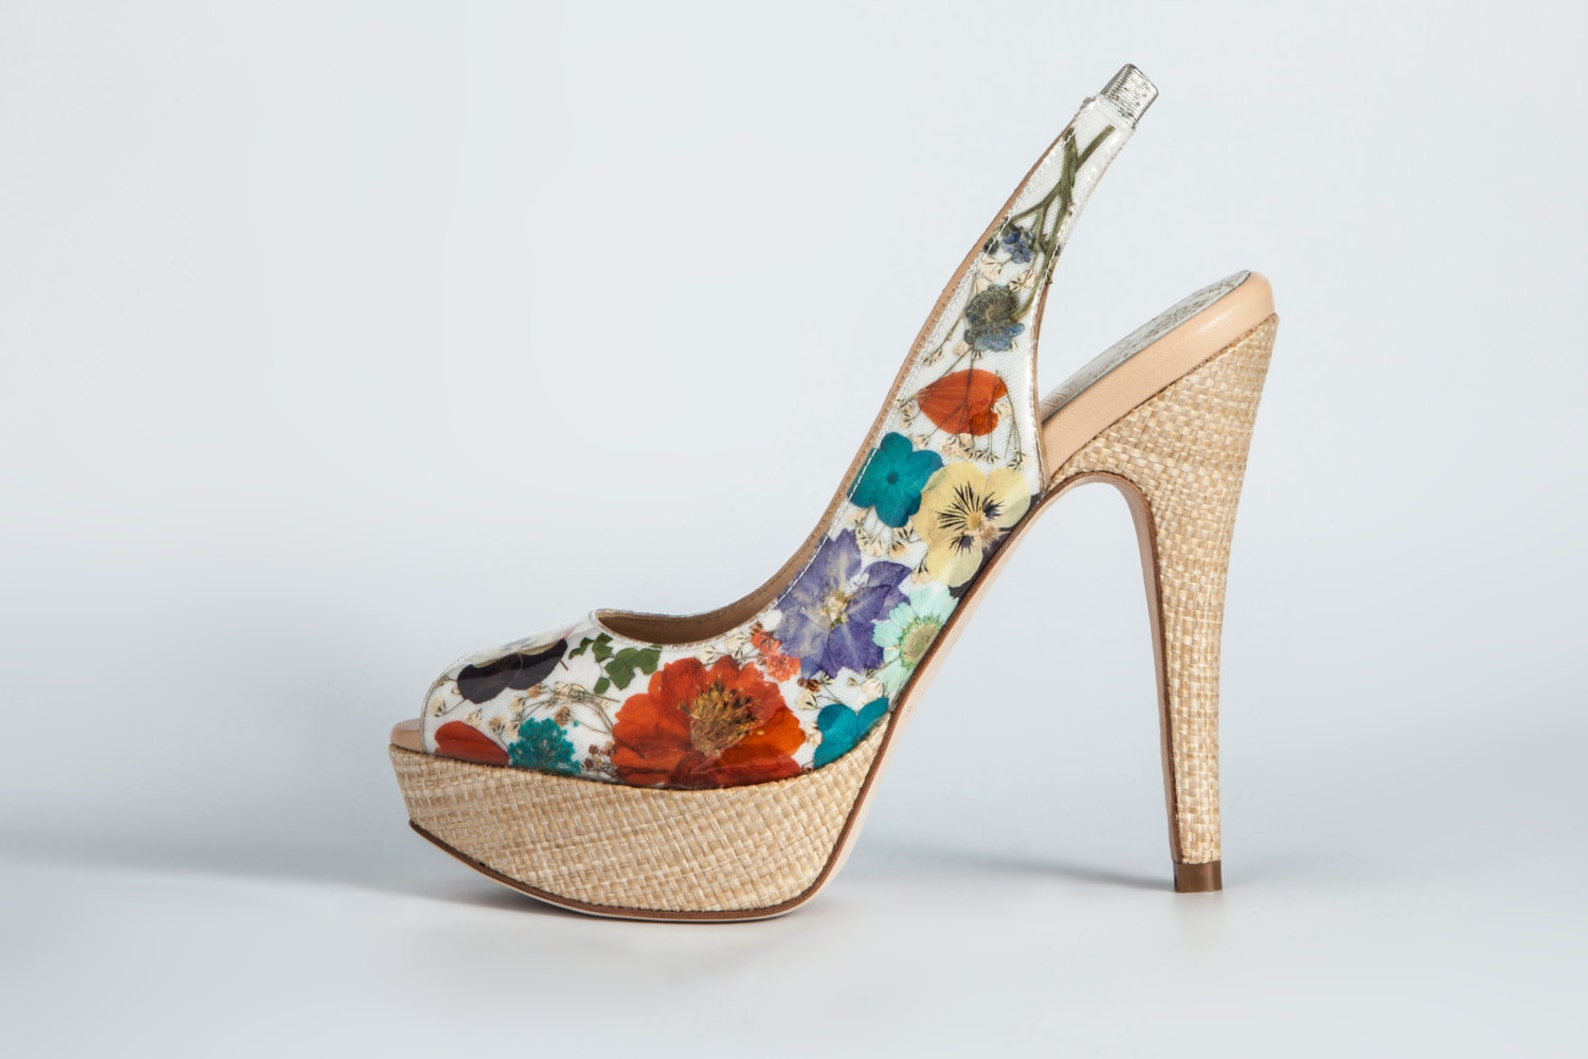 Floral Love: Patent Pending Shoes With Real Pressed Flowers. - Etsy